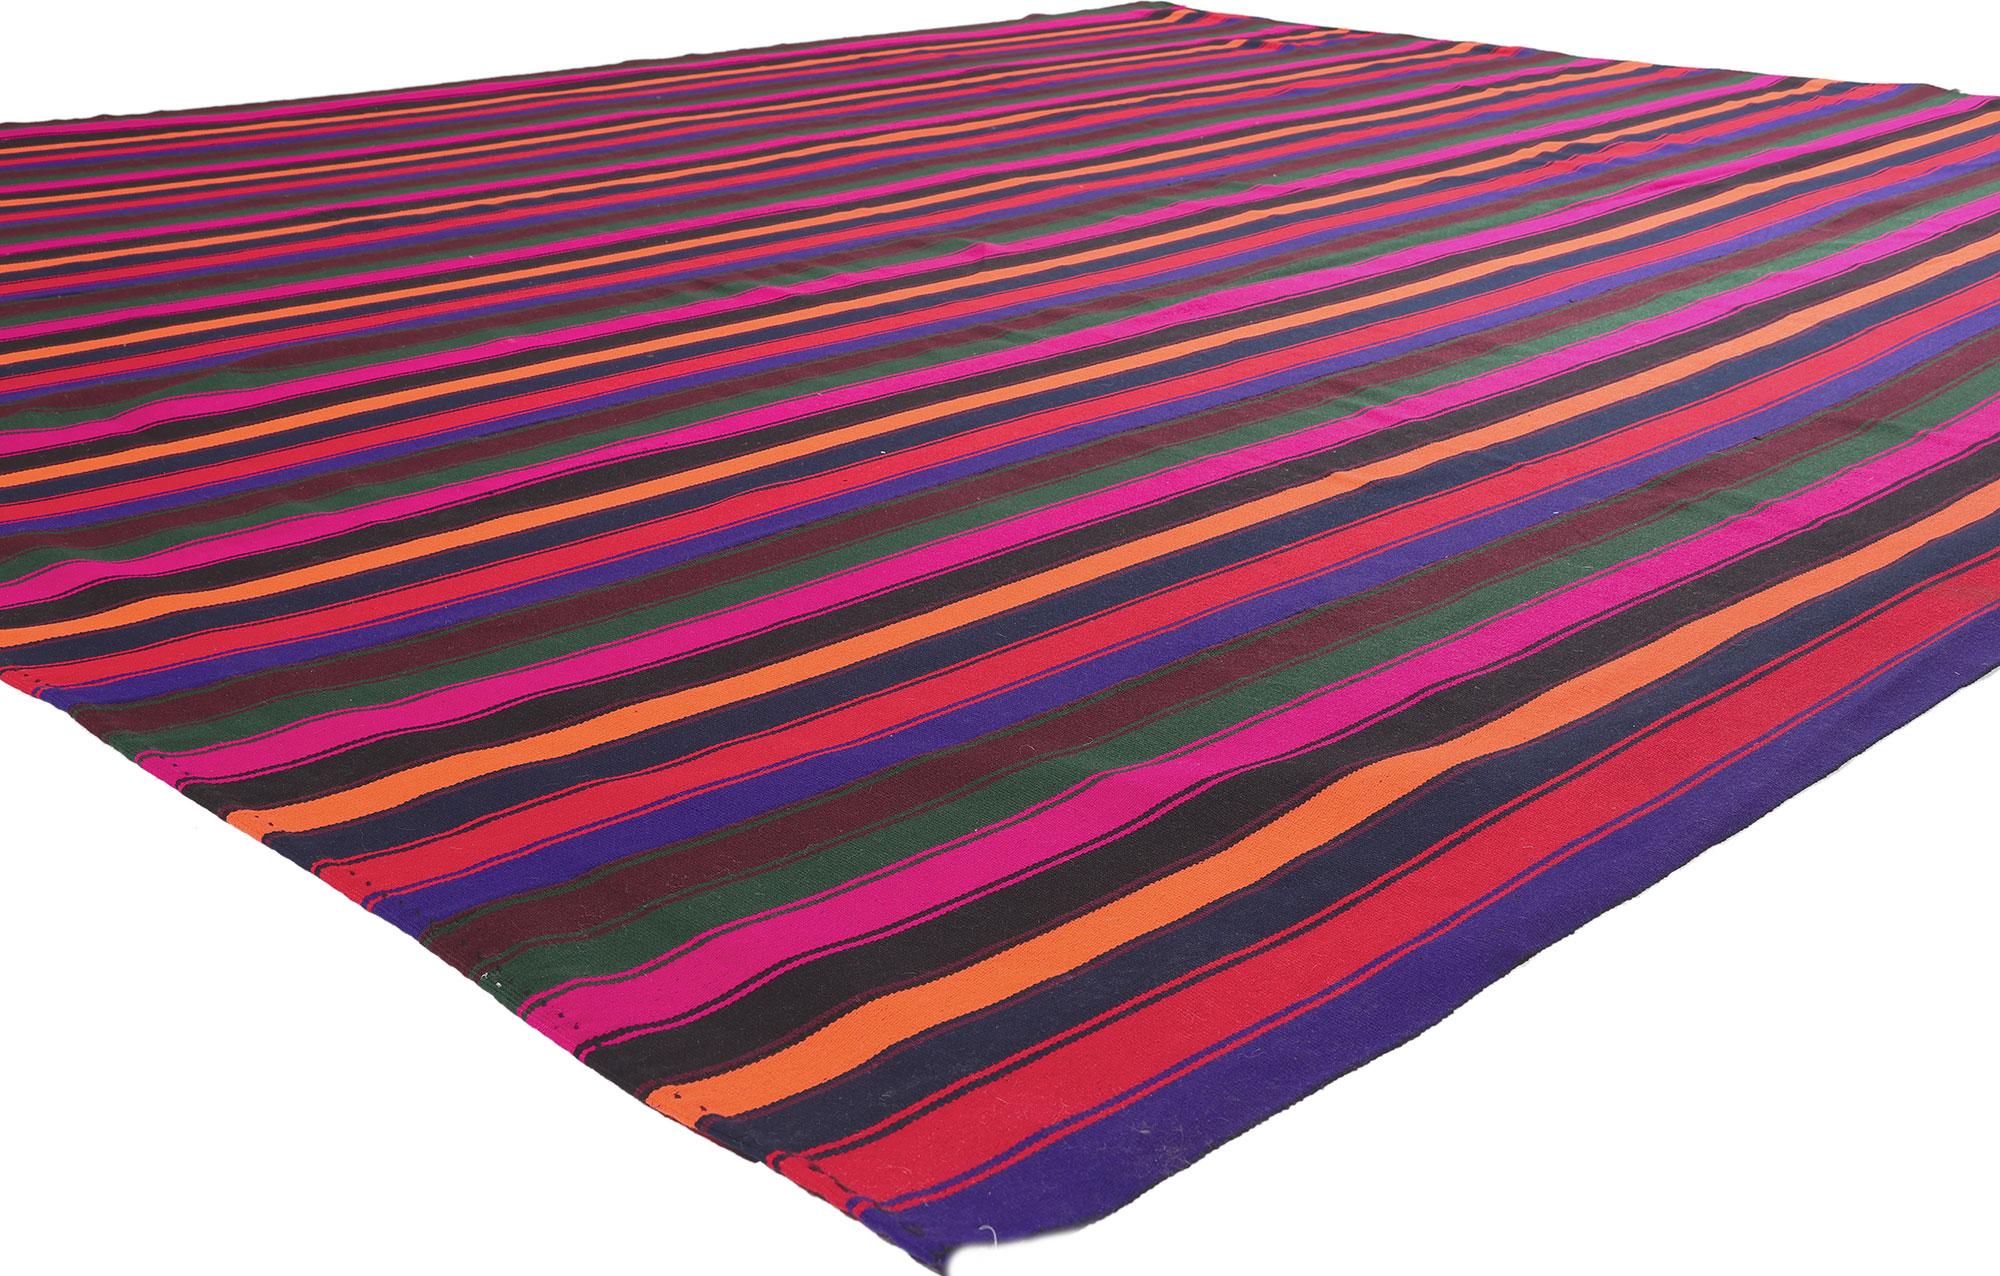 60741 Vintage Turkish Striped Kilim Rug, 10’06 x 12’05.
Bold, bring, modern and vintage, this handwoven striped kilim area rug has it all. The eye-catching stripe pattern and vibrant colorway woven into this piece work together creating a cozy,